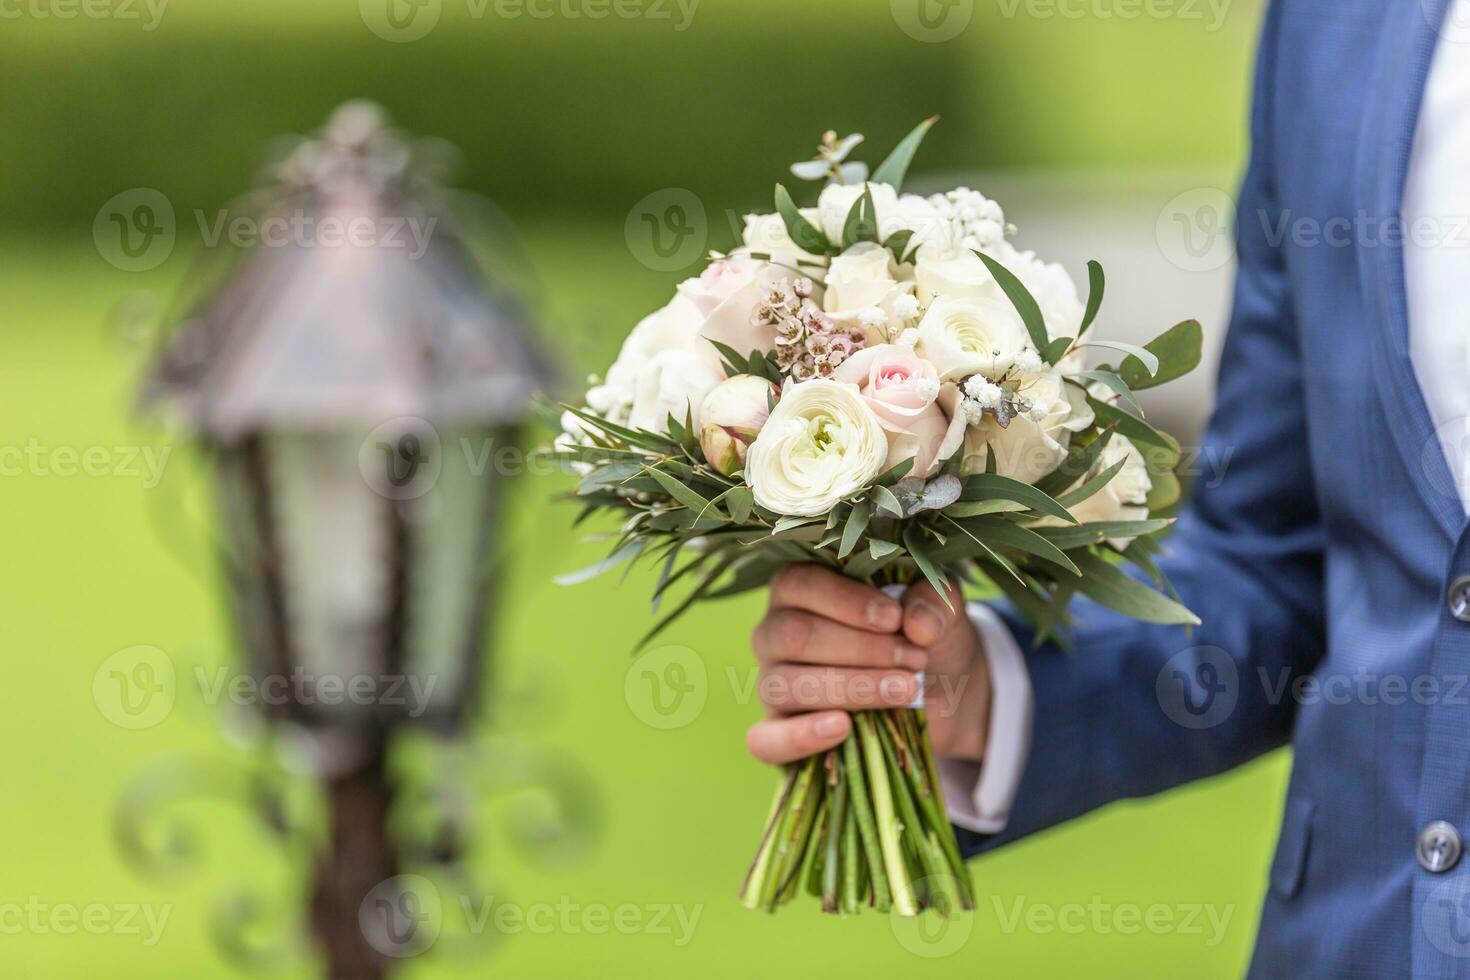 Groom holds a wedding bouquet with white flowers outdoors on a wedding day photo